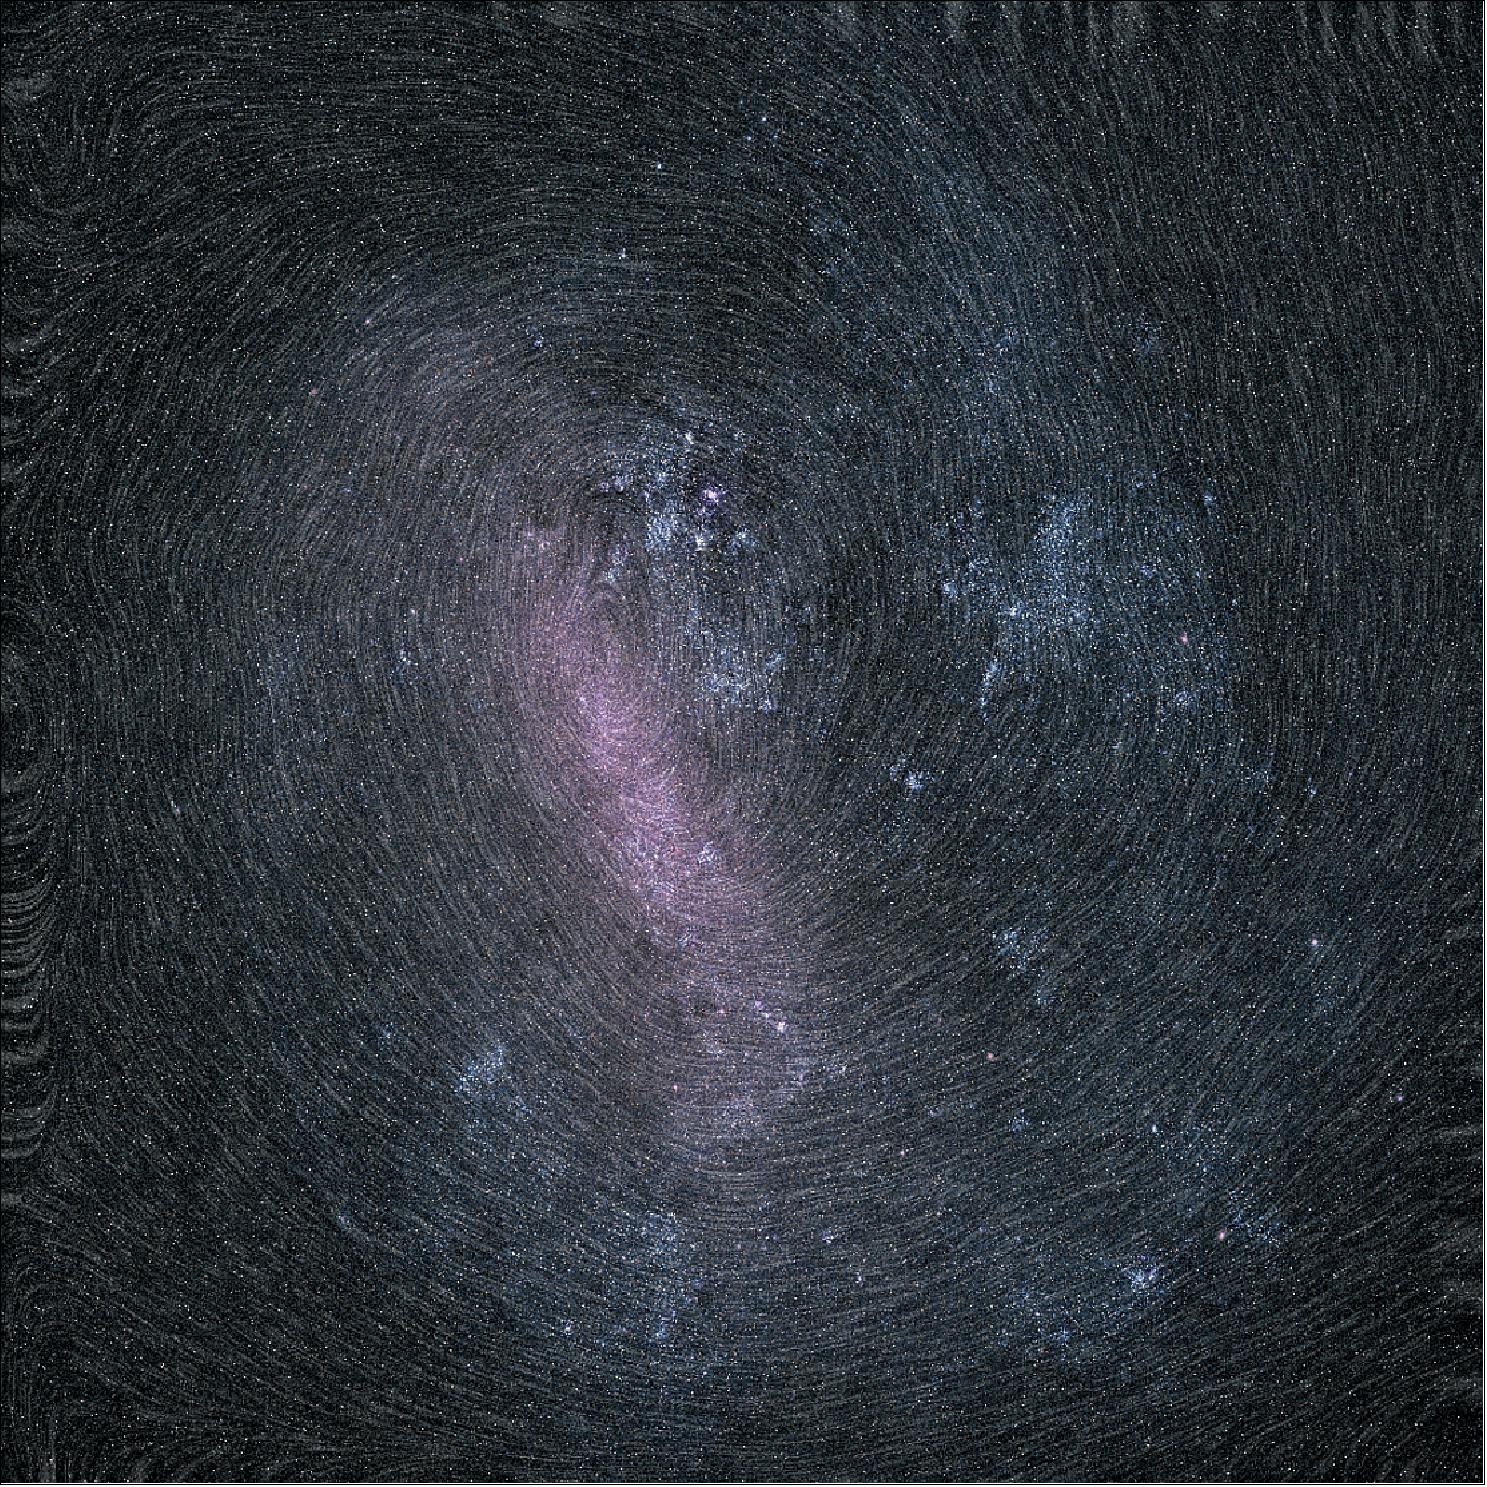 Figure 48: The Large Magellanic Cloud (LMC), one of the nearest galaxies to our Milky Way, as viewed by ESA's Gaia satellite using information from the mission's second data release (image credit: ESA/Gaia/DPAC) 48) Acknowledgement: Gaia Data Processing and Analysis Consortium (DPAC); P. McMillan, Lund Observatory, Sweden; A. Moitinho / A. F. Silva / M. Barros / C. Barata, University of Lisbon, Portugal; H. Savietto, Fork Research, Portugal